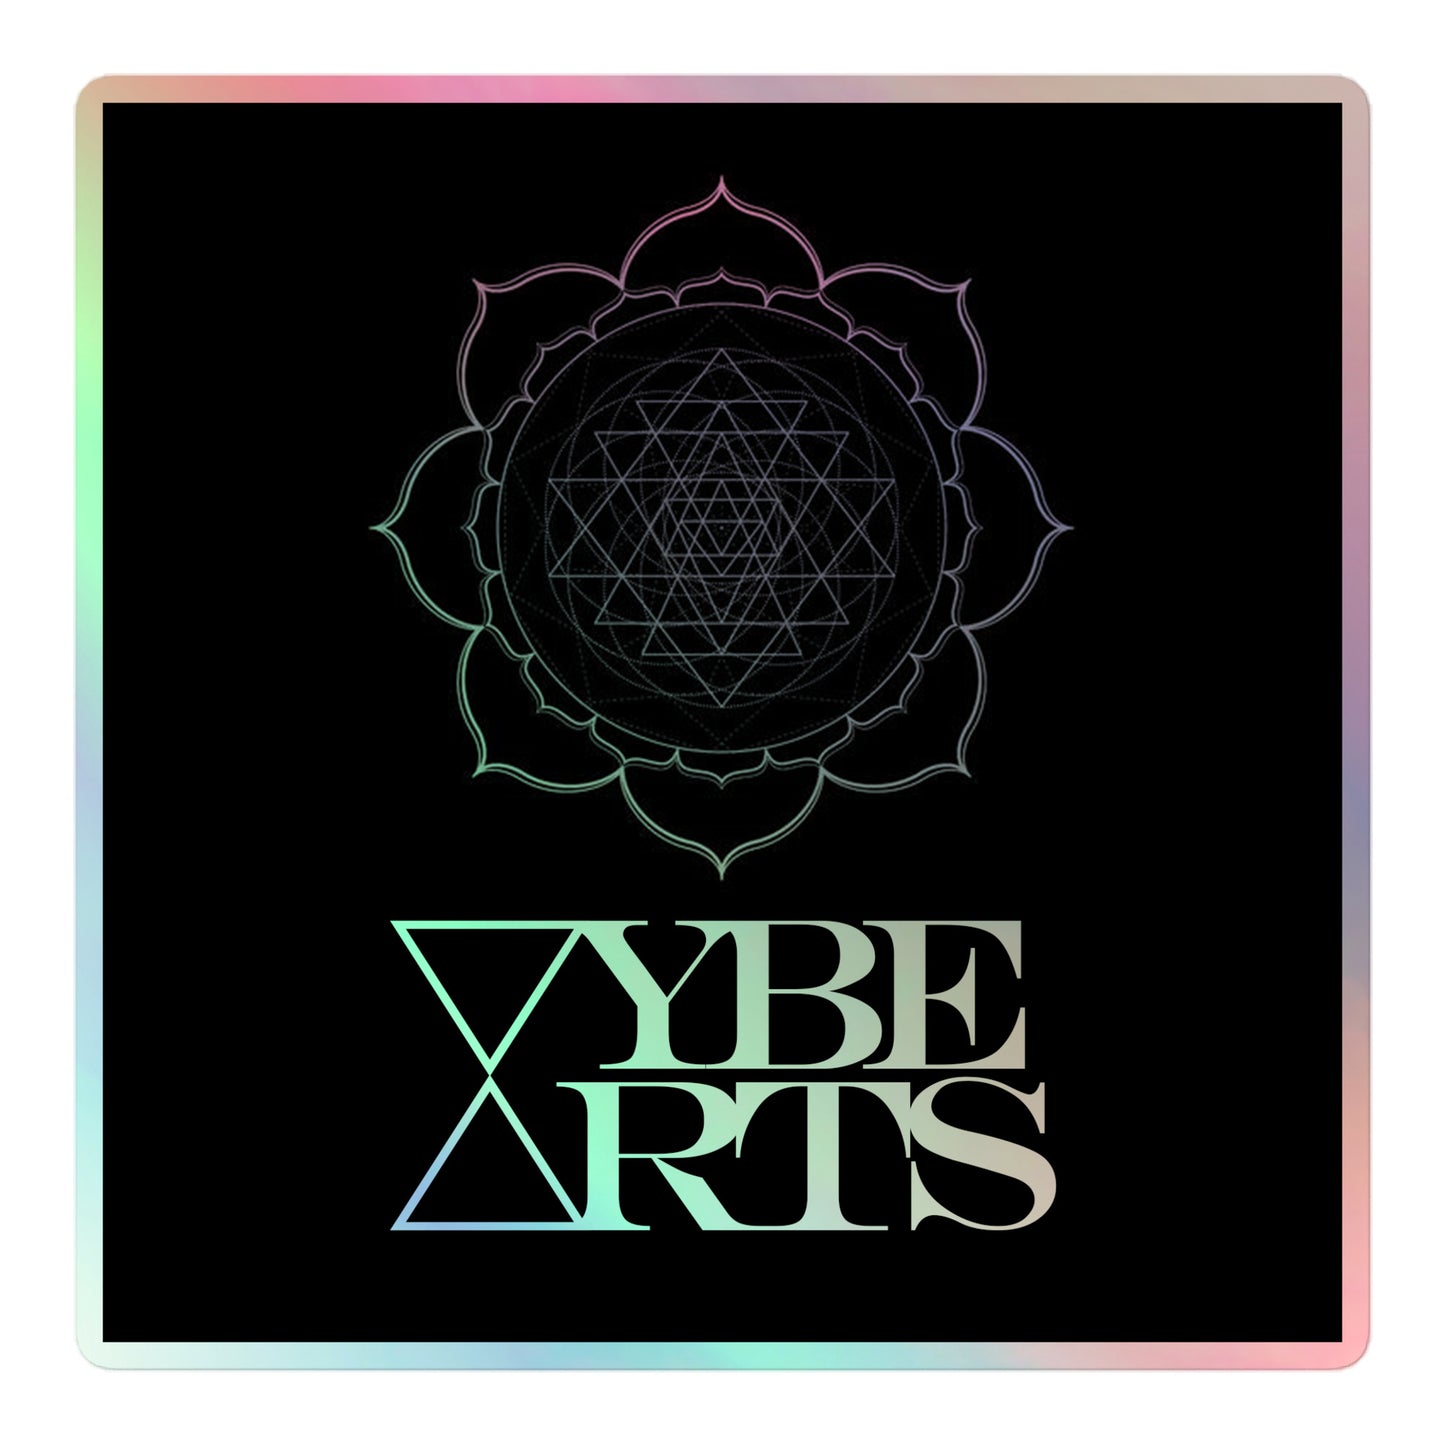 VYBE ARTS Black Holographic sticker